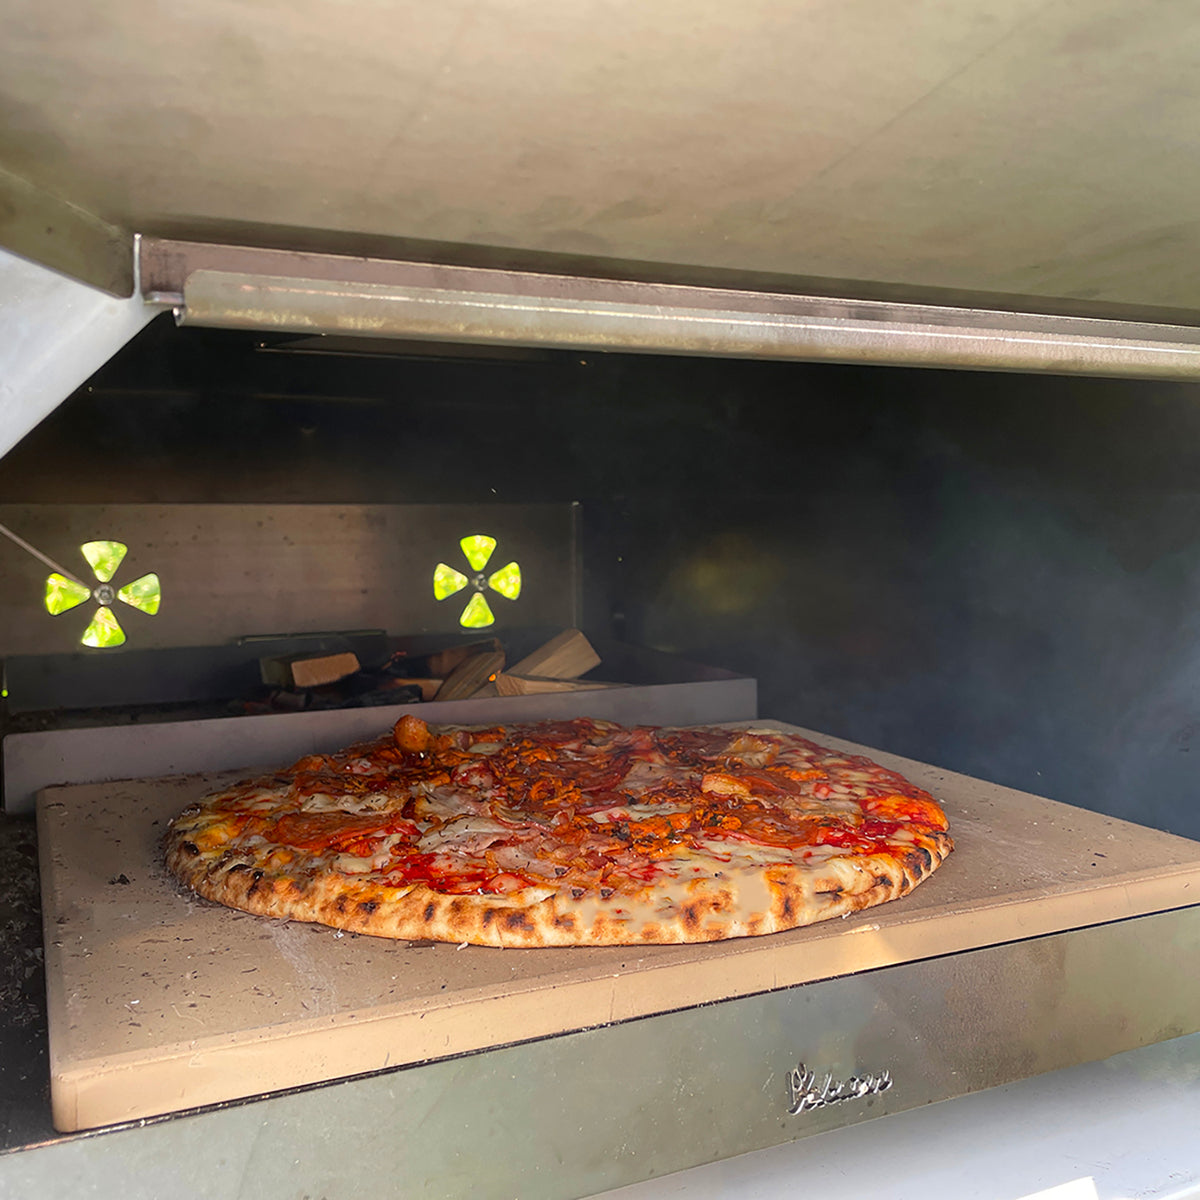 Volcann™ Woodfired Table Top Pizza Oven - Indoor Outdoors